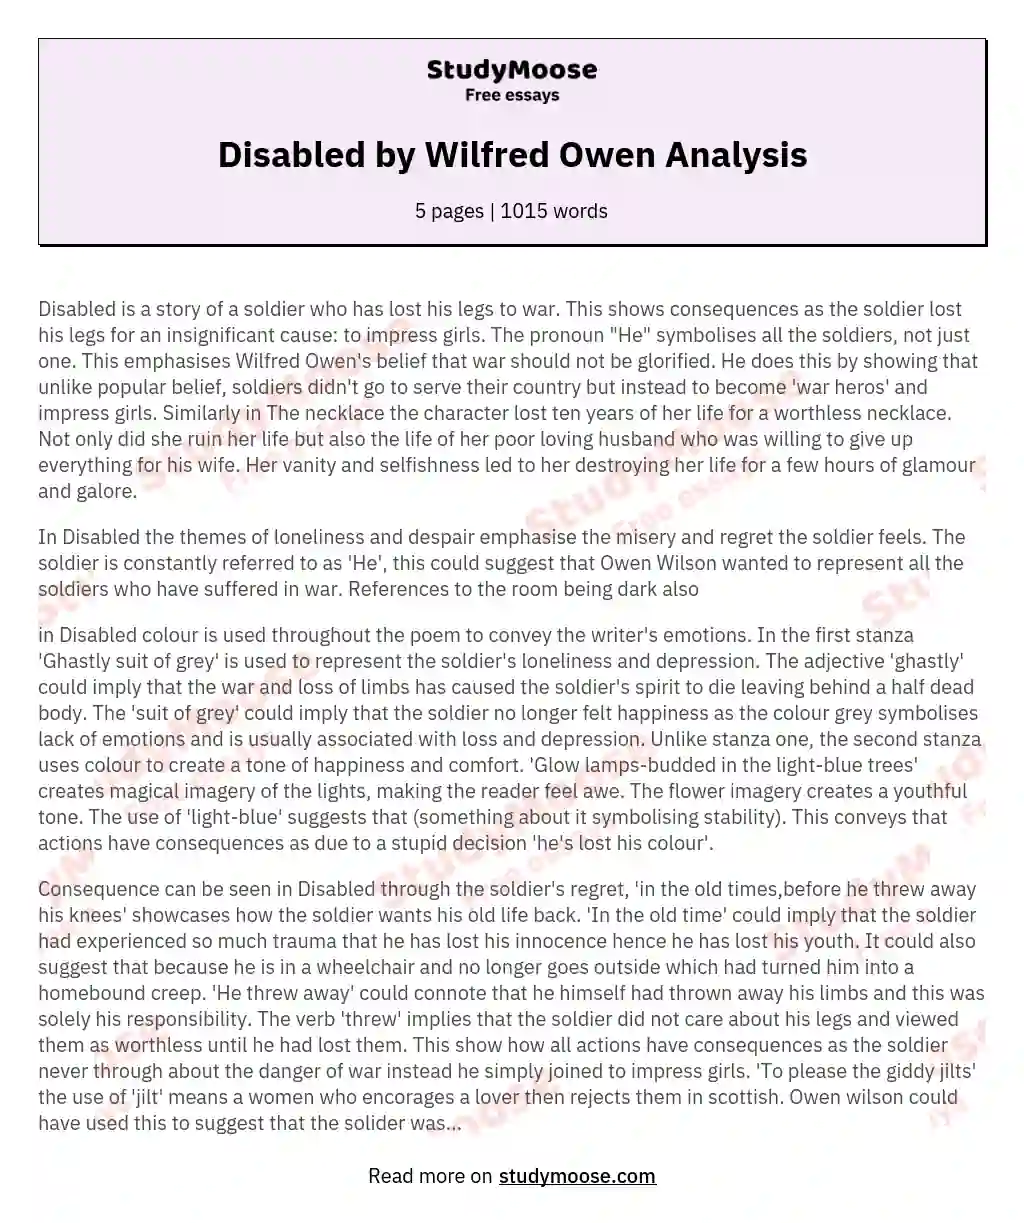 Disabled by Wilfred Owen Analysis essay